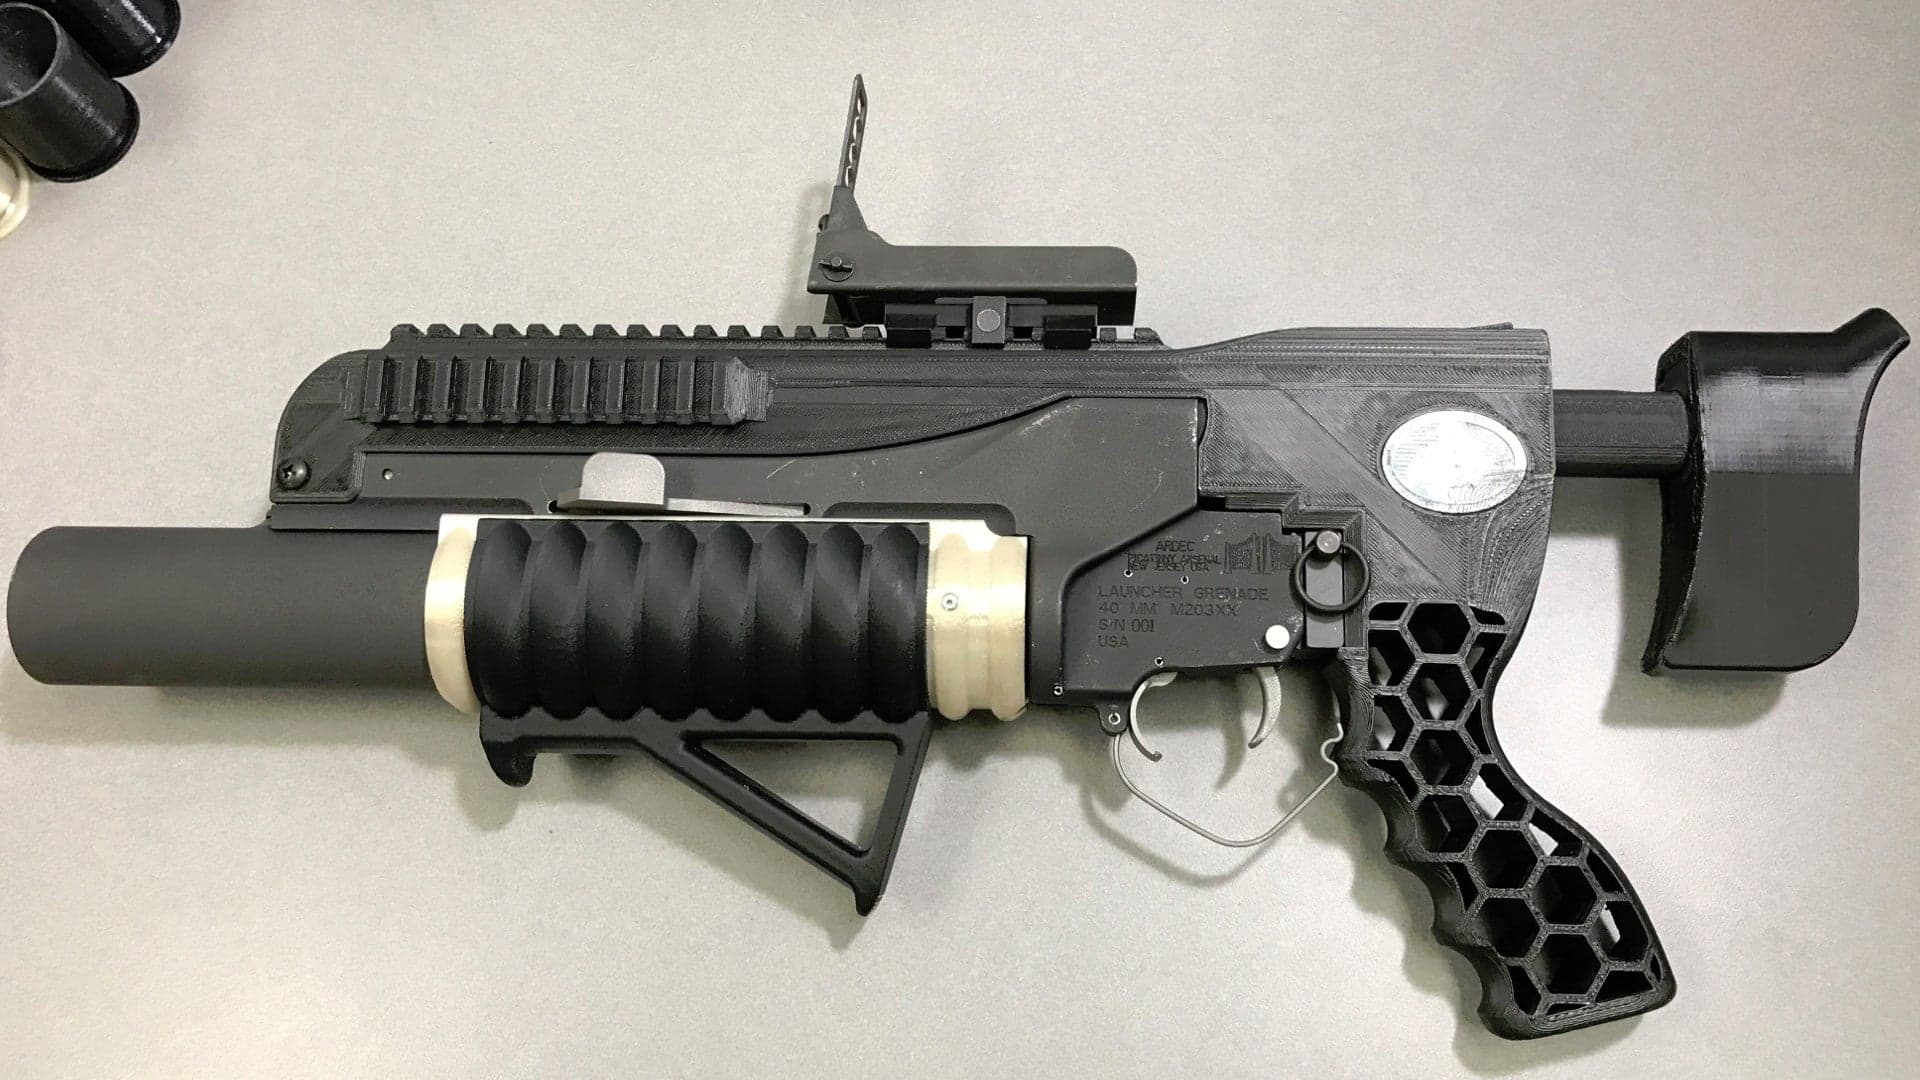 Meet RAMBO, the U.S. Army’s 3D-Printed Grenade Launcher